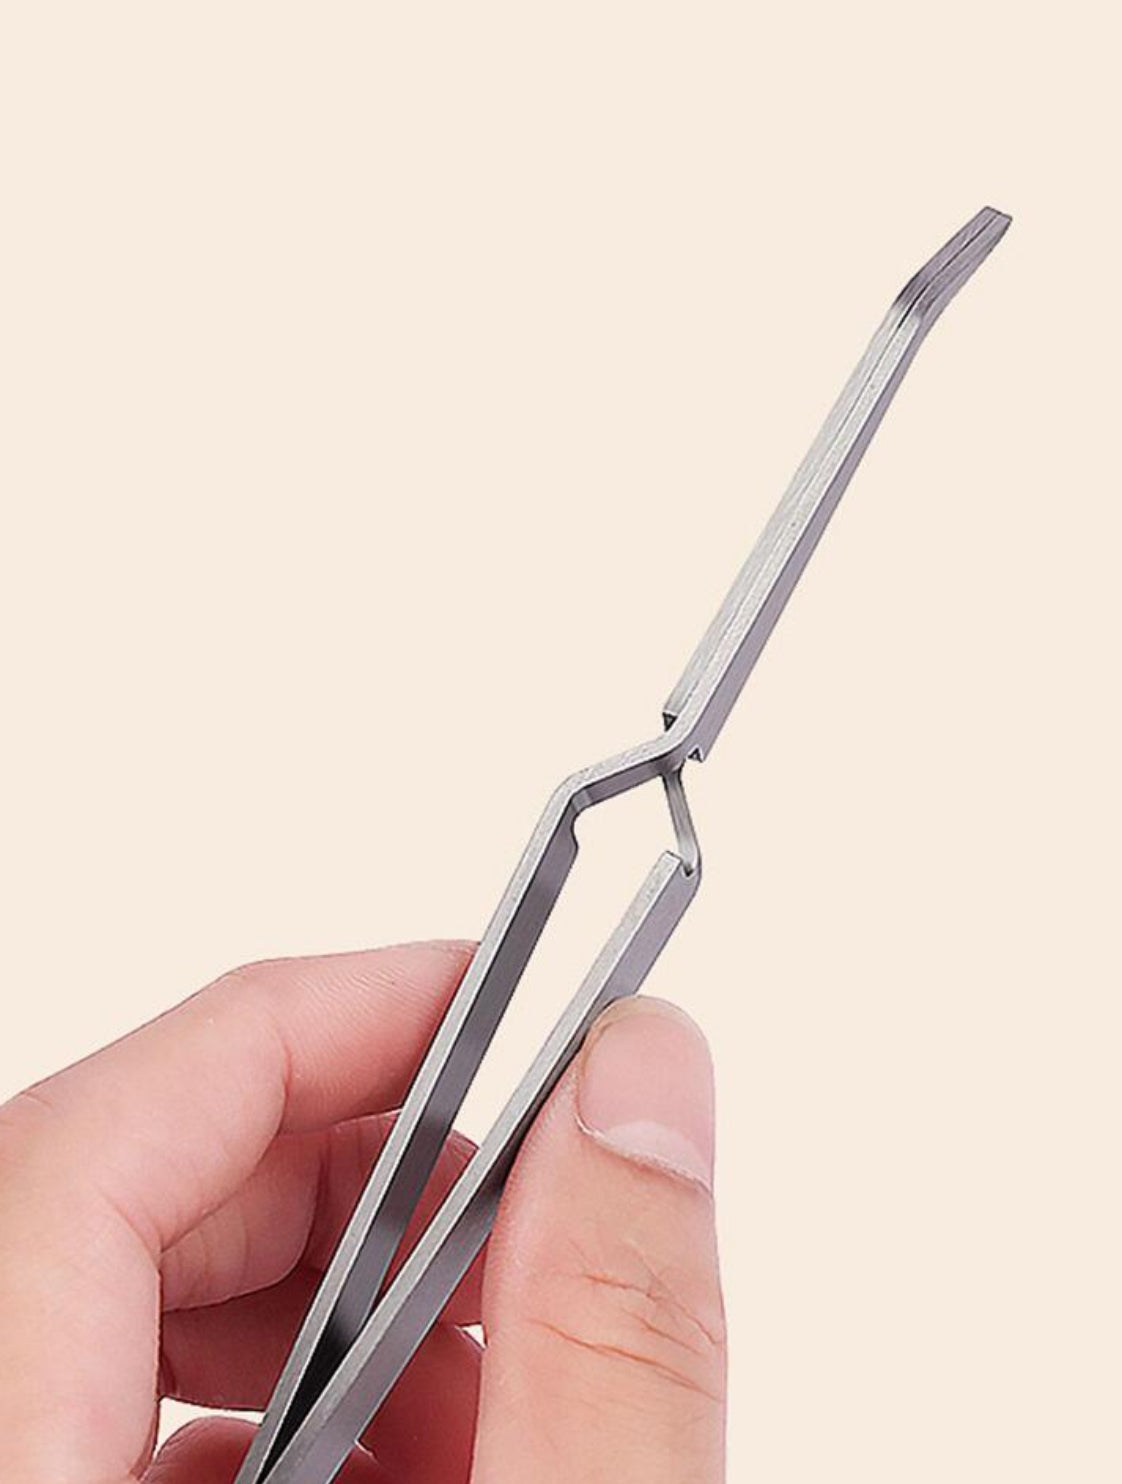 Gradient-colored Nail Art Tweezer Clamp - Fixing And Shaping Artificial Nails